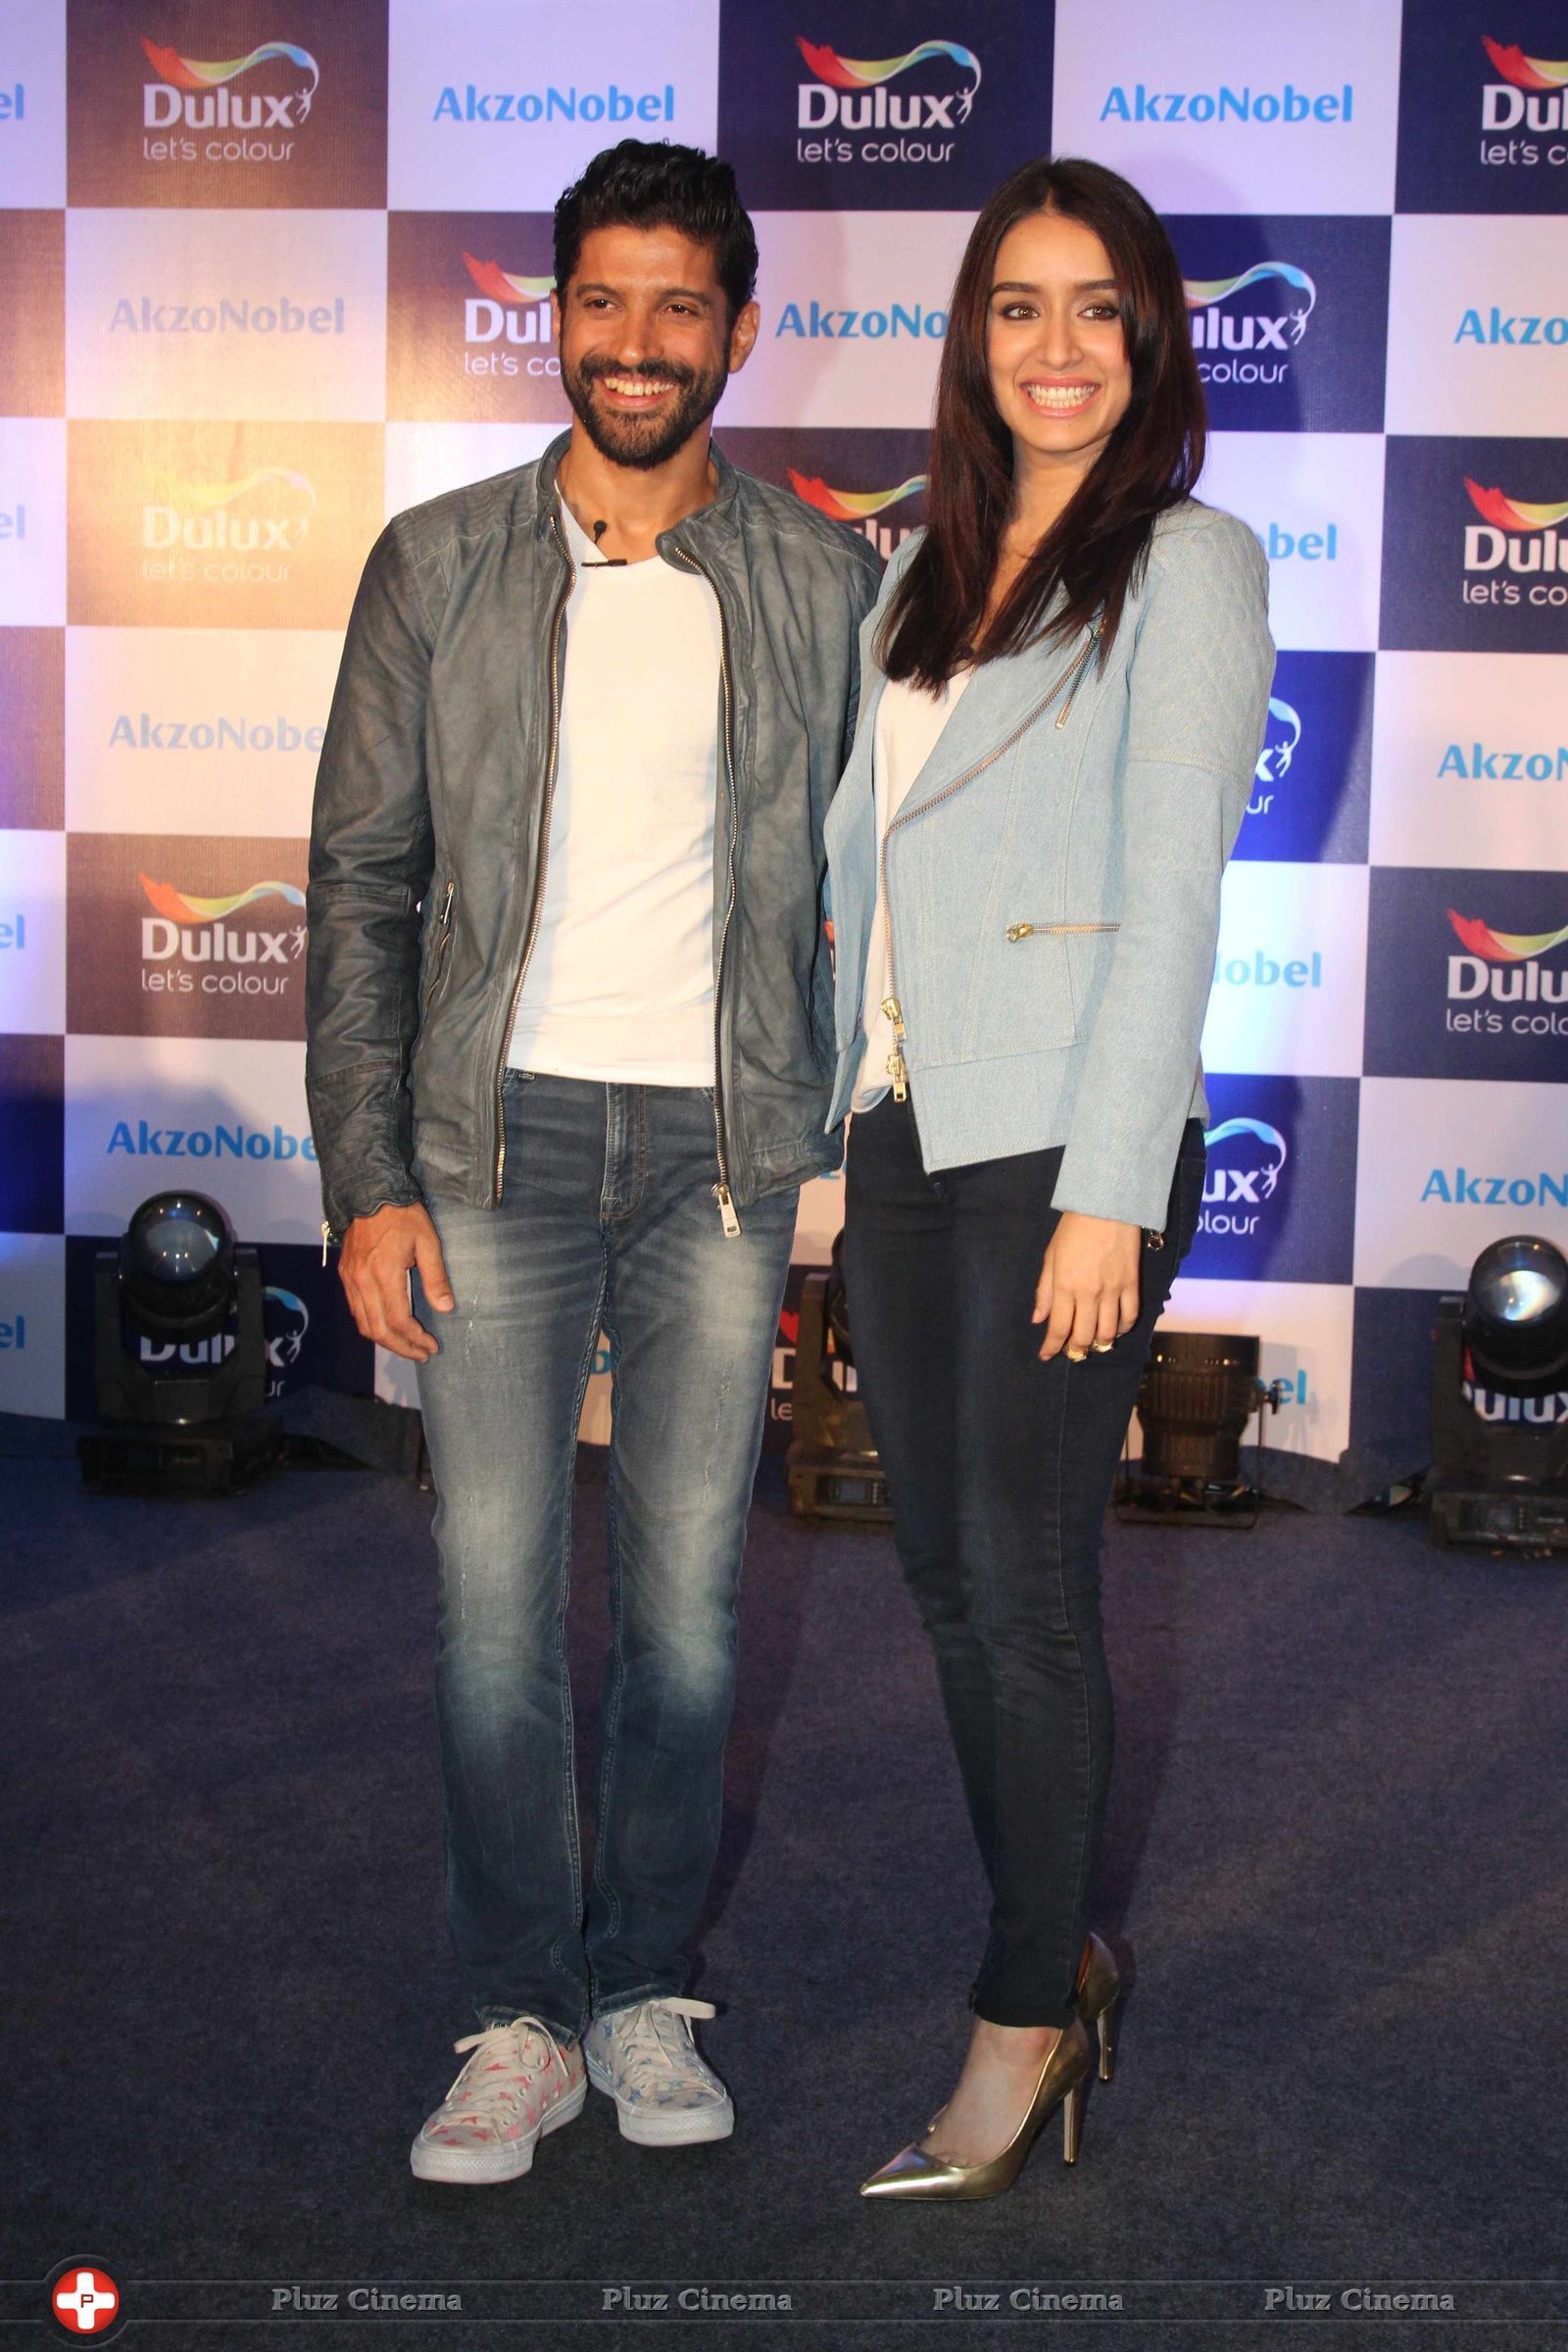 Farhan Akhtar and Shraddha Kapoor at the launch of Dulux new Color Range Photos | Picture 1445957